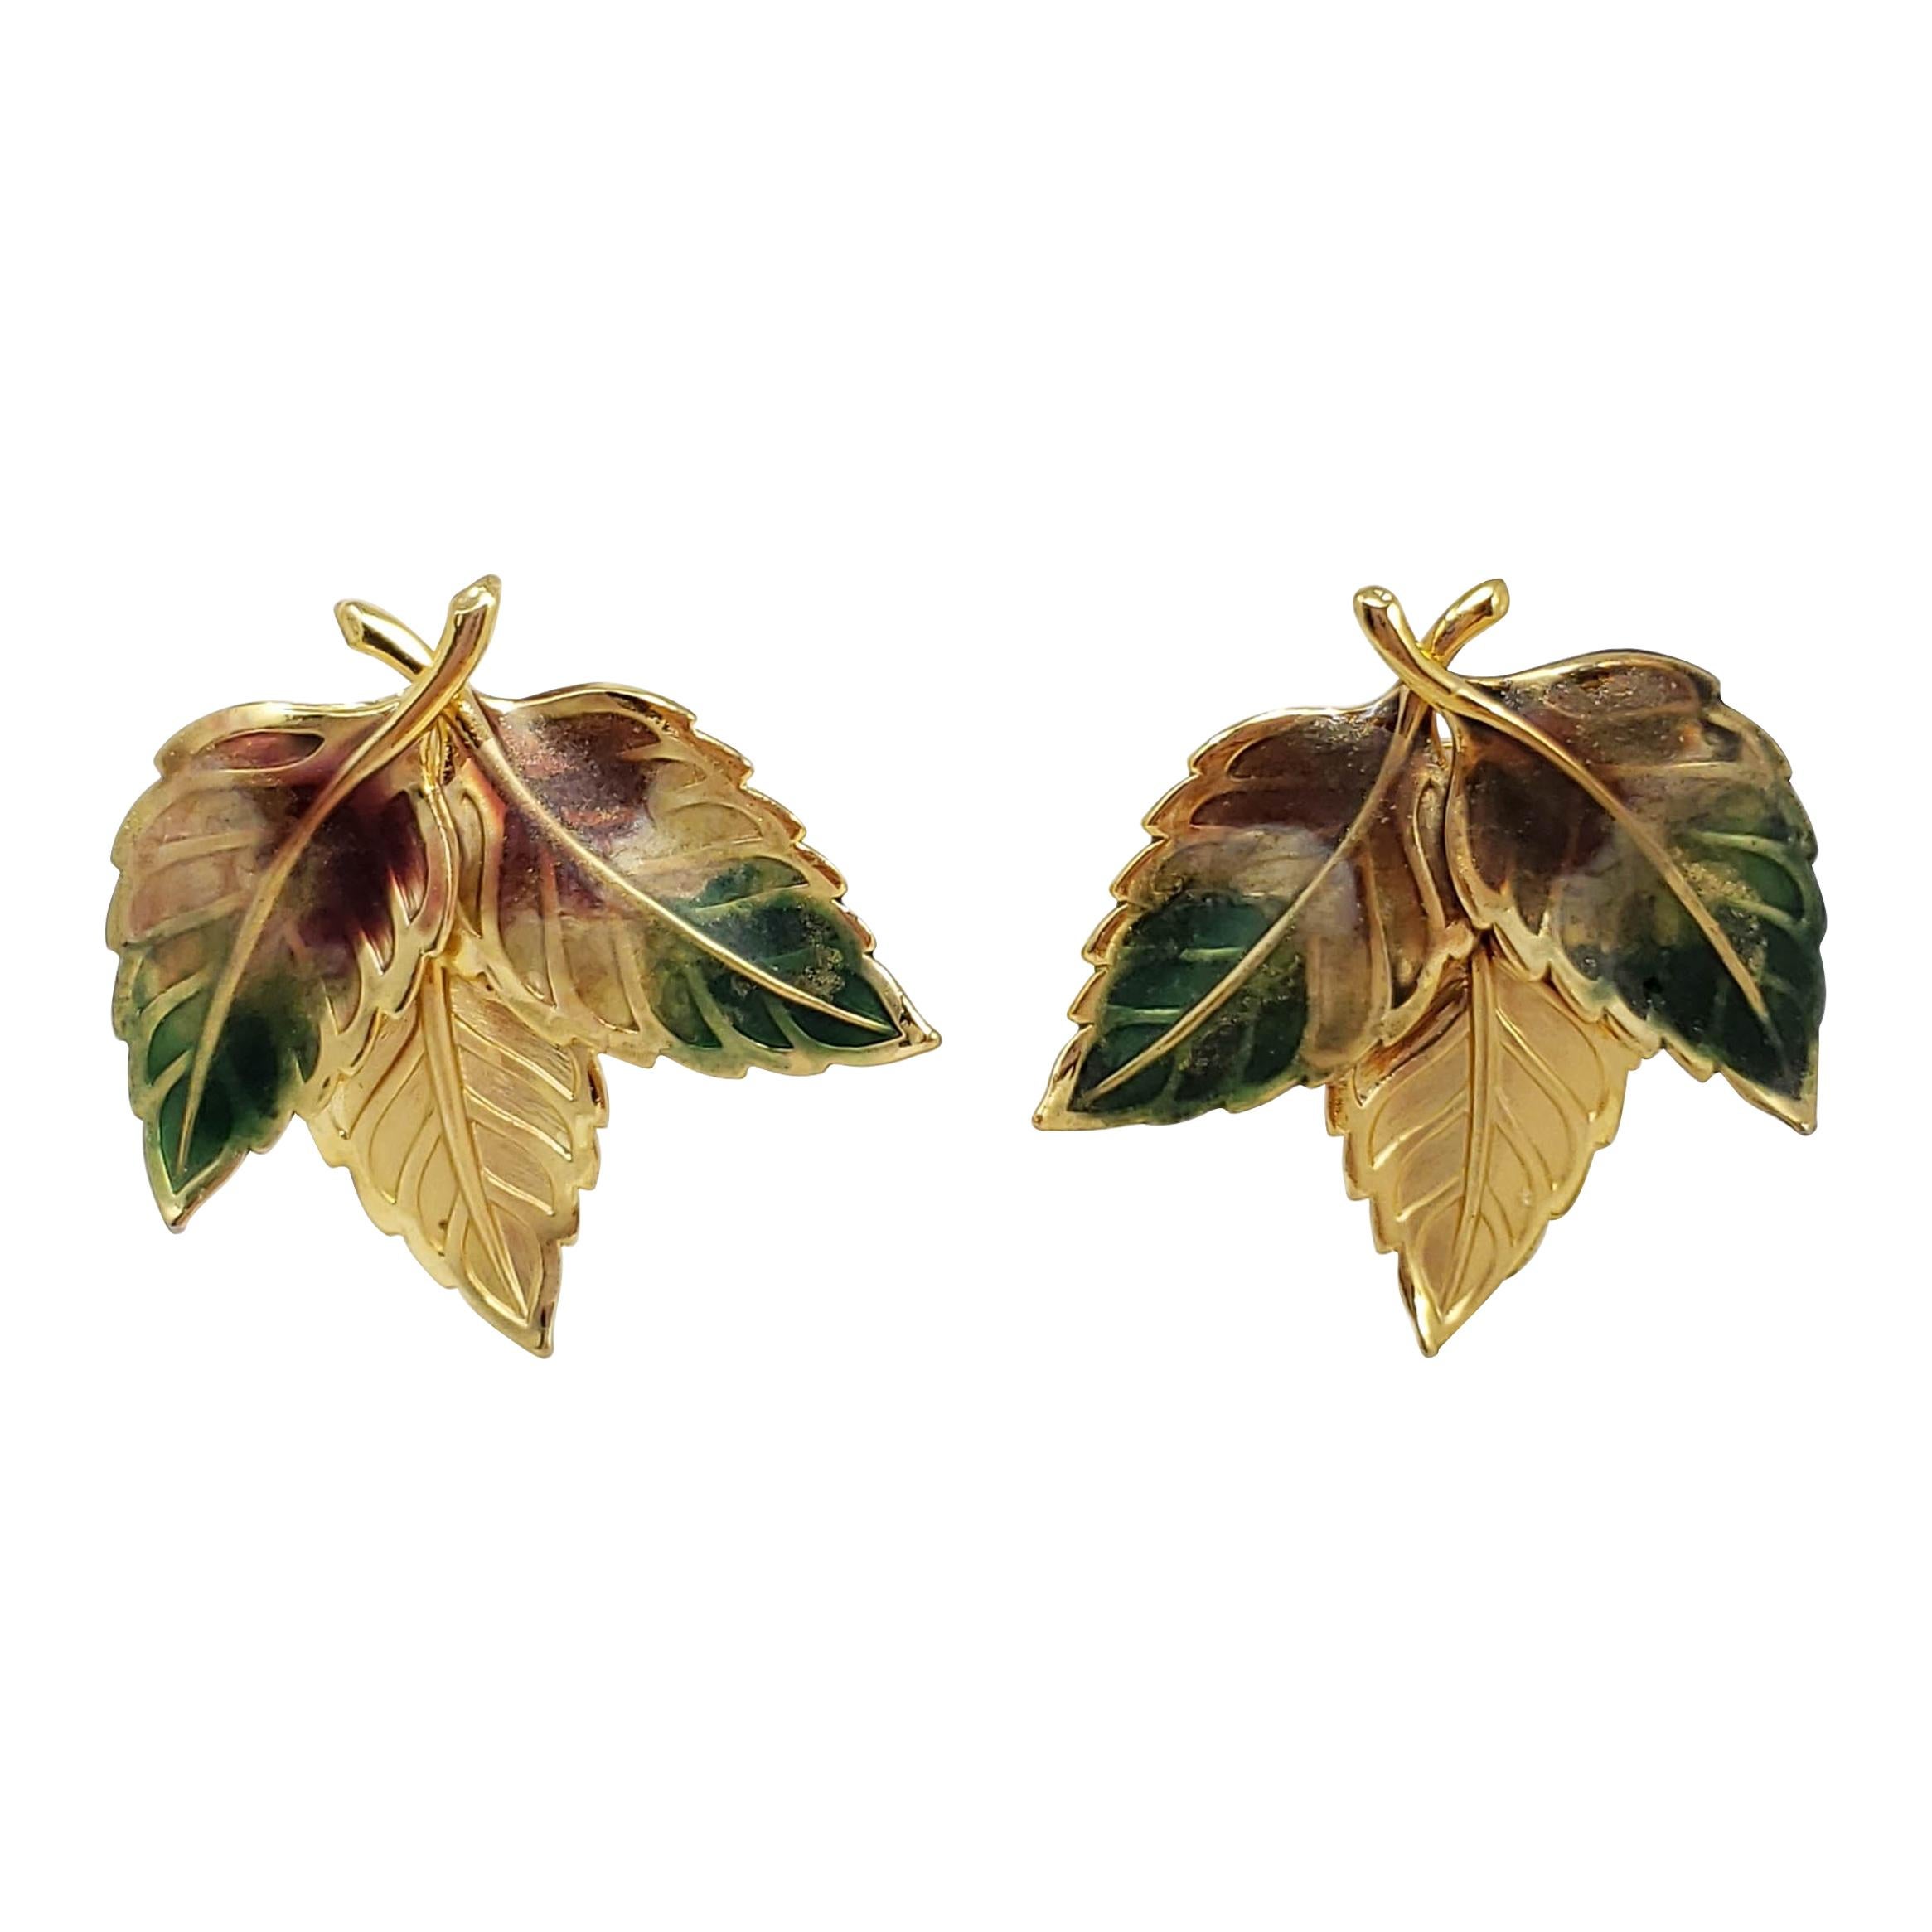 Painted Three Leaf Clip on Earrings in Gold, Green, and Brown. Vintage, Mid 1900 For Sale